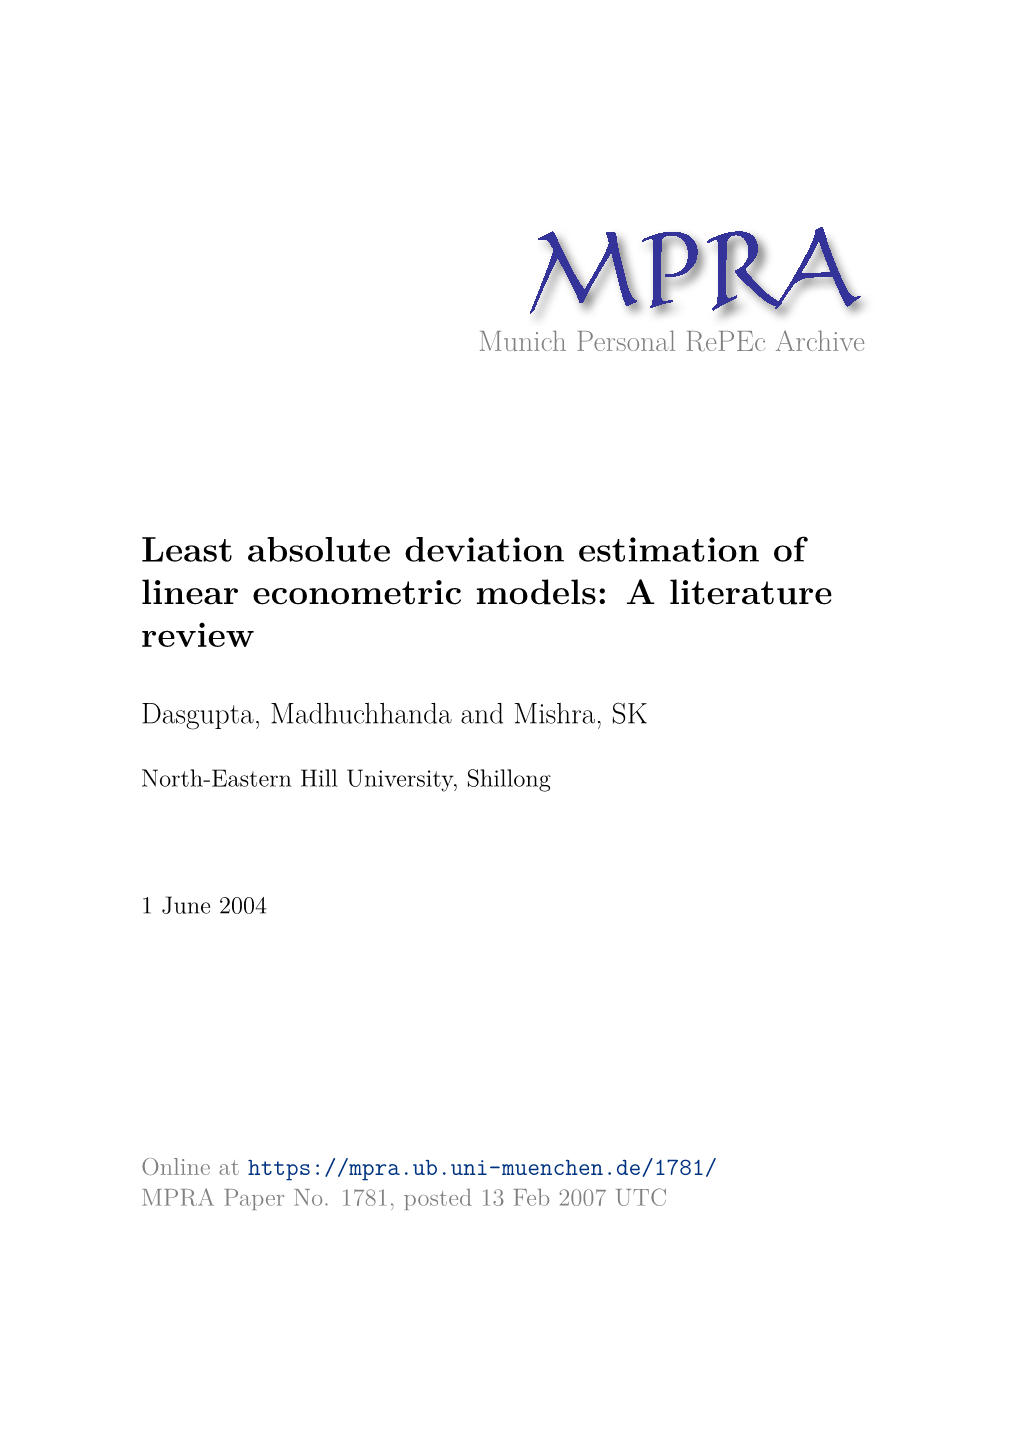 Least Absolute Deviation Estimation of Linear Econometric Models: a Literature Review